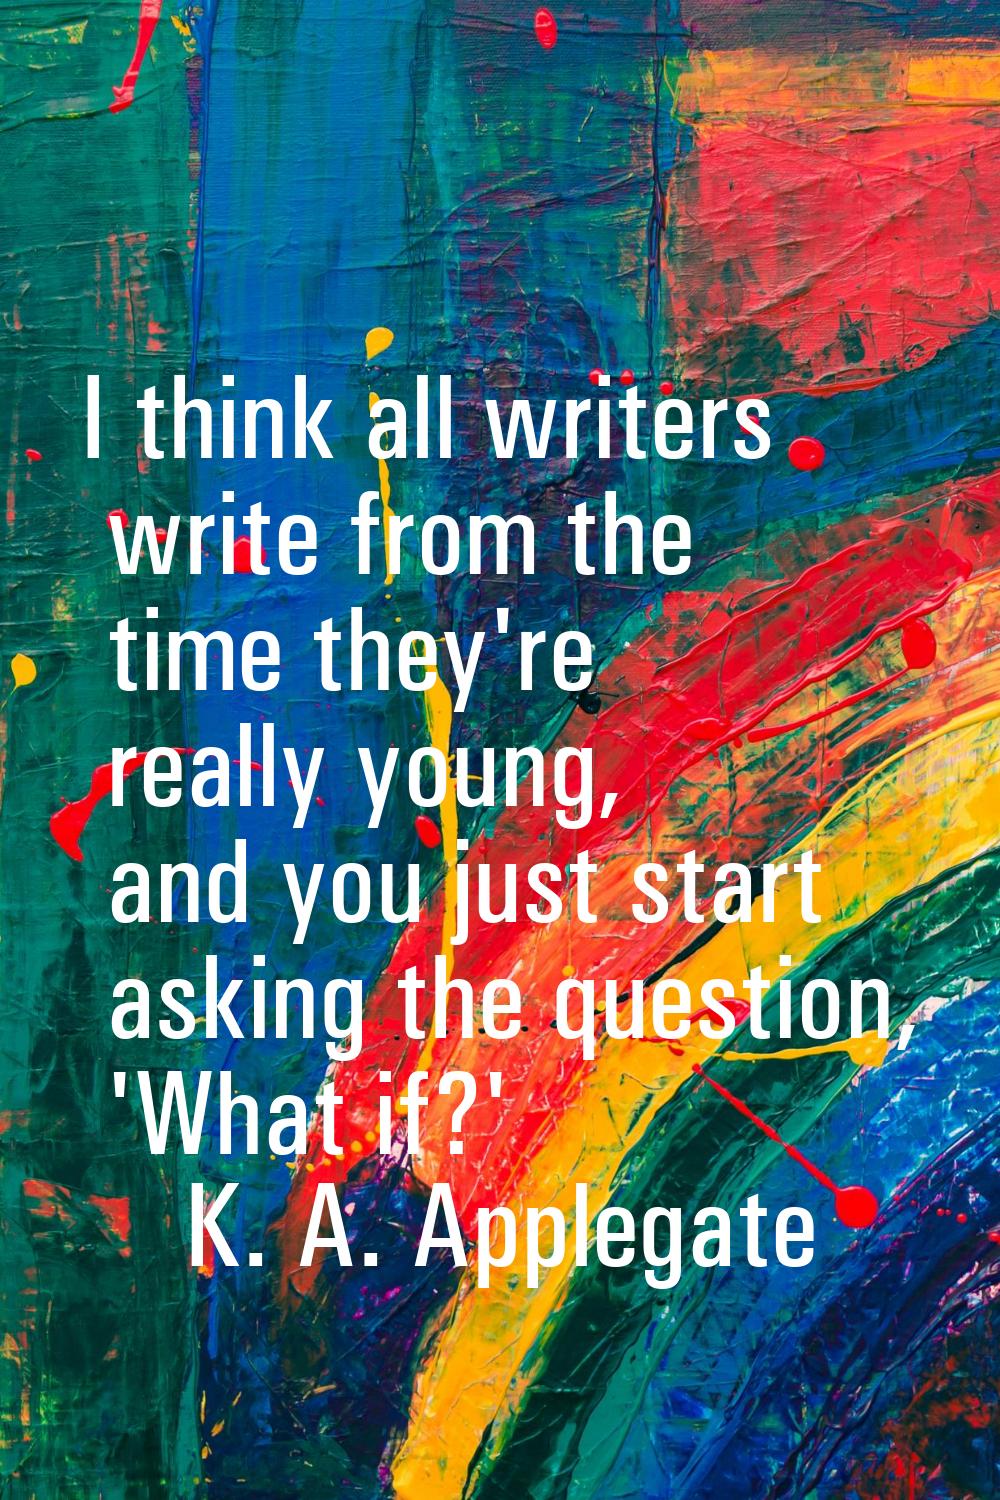 I think all writers write from the time they're really young, and you just start asking the questio